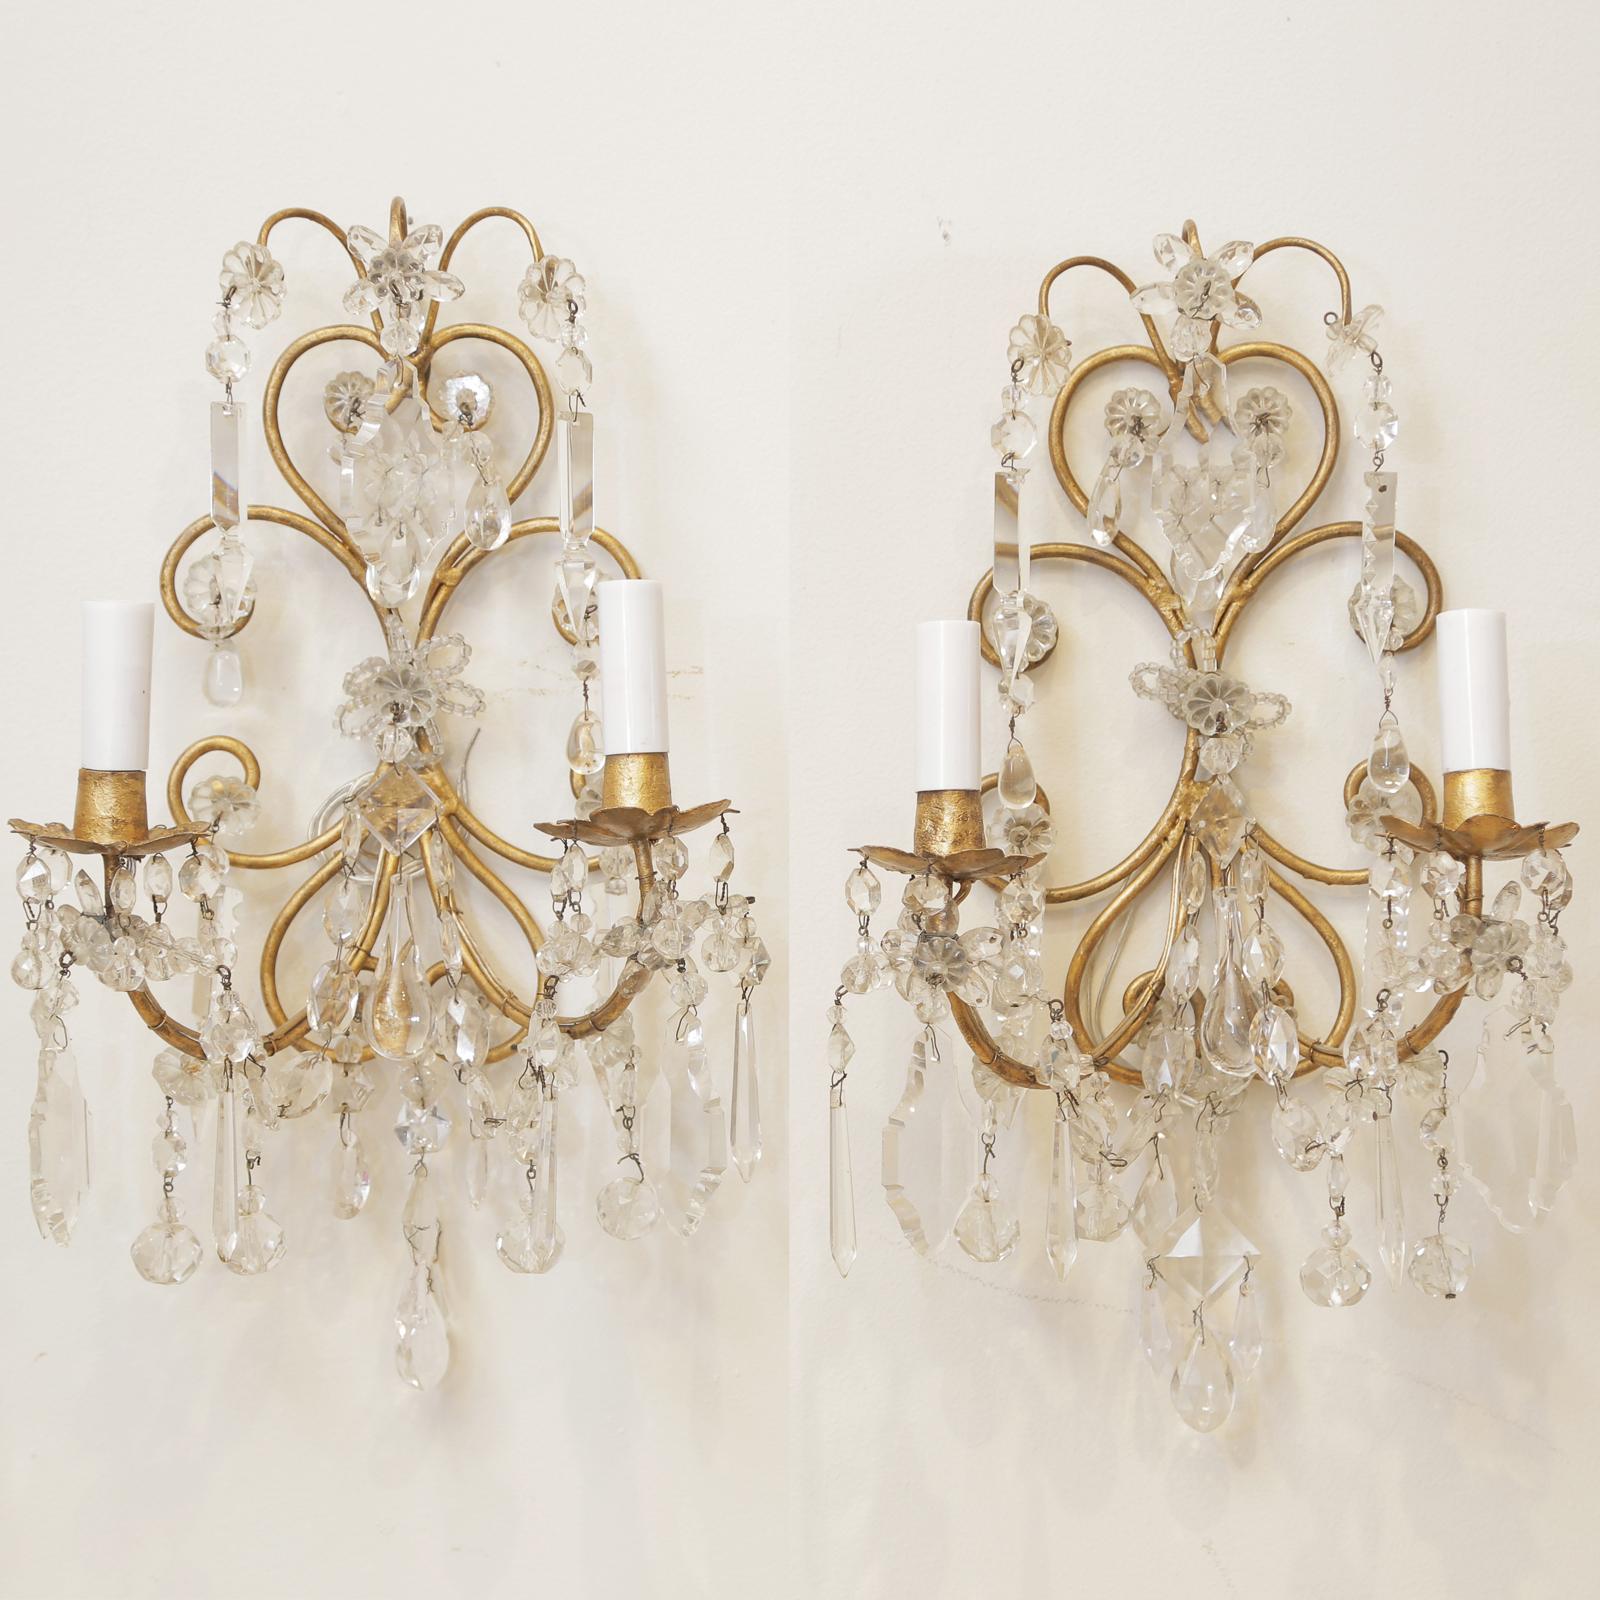 Pair of sconces, each having a backplate of scrolling gilt metal, adorned with faceted crystal prisms, drops, and pendants; floral rosettes petals pay homage to the styles of Maison Bagues, two C-scroll candlearms extend from the backplate and